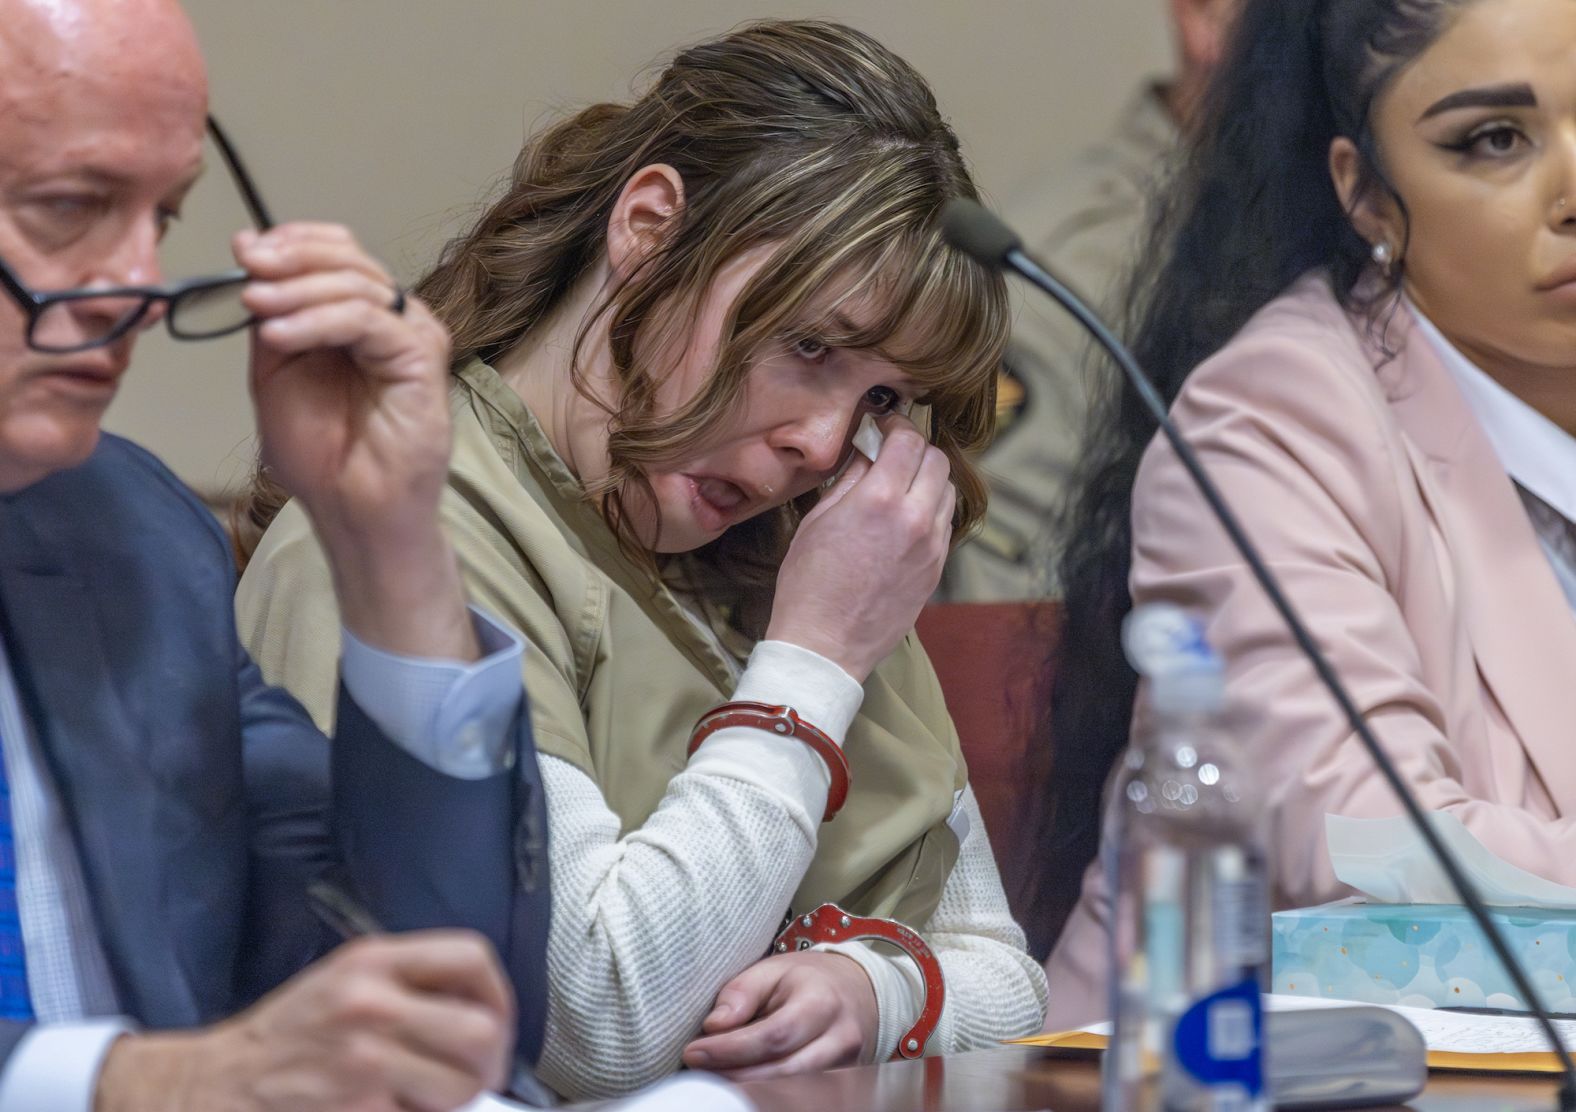 Rust armorer Hannah Gutierrez Reed wipes her tears during her sentencing in Santa Fe, New Mexico, on Monday, April 15. Gutierrez Reed, who was <a href="https://www.cnn.com/2024/03/06/entertainment/rust-trial-hannah-gutierrez-reed/index.html" target="_blank">found guilty of involuntary manslaughter</a> last month for the 2021 on-set fatal shooting of <a href="https://www.cnn.com/2023/01/19/entertainment/halyna-hutchins-remembered/index.html" target="_blank">cinematographer Halyna Hutchins</a>, was <a href="https://www.cnn.com/2024/04/15/entertainment/rust-film-shooting-armorer-sentencing/index.html" target="_blank">sentenced to 18 months in prison</a>, the maximum possible punishment.